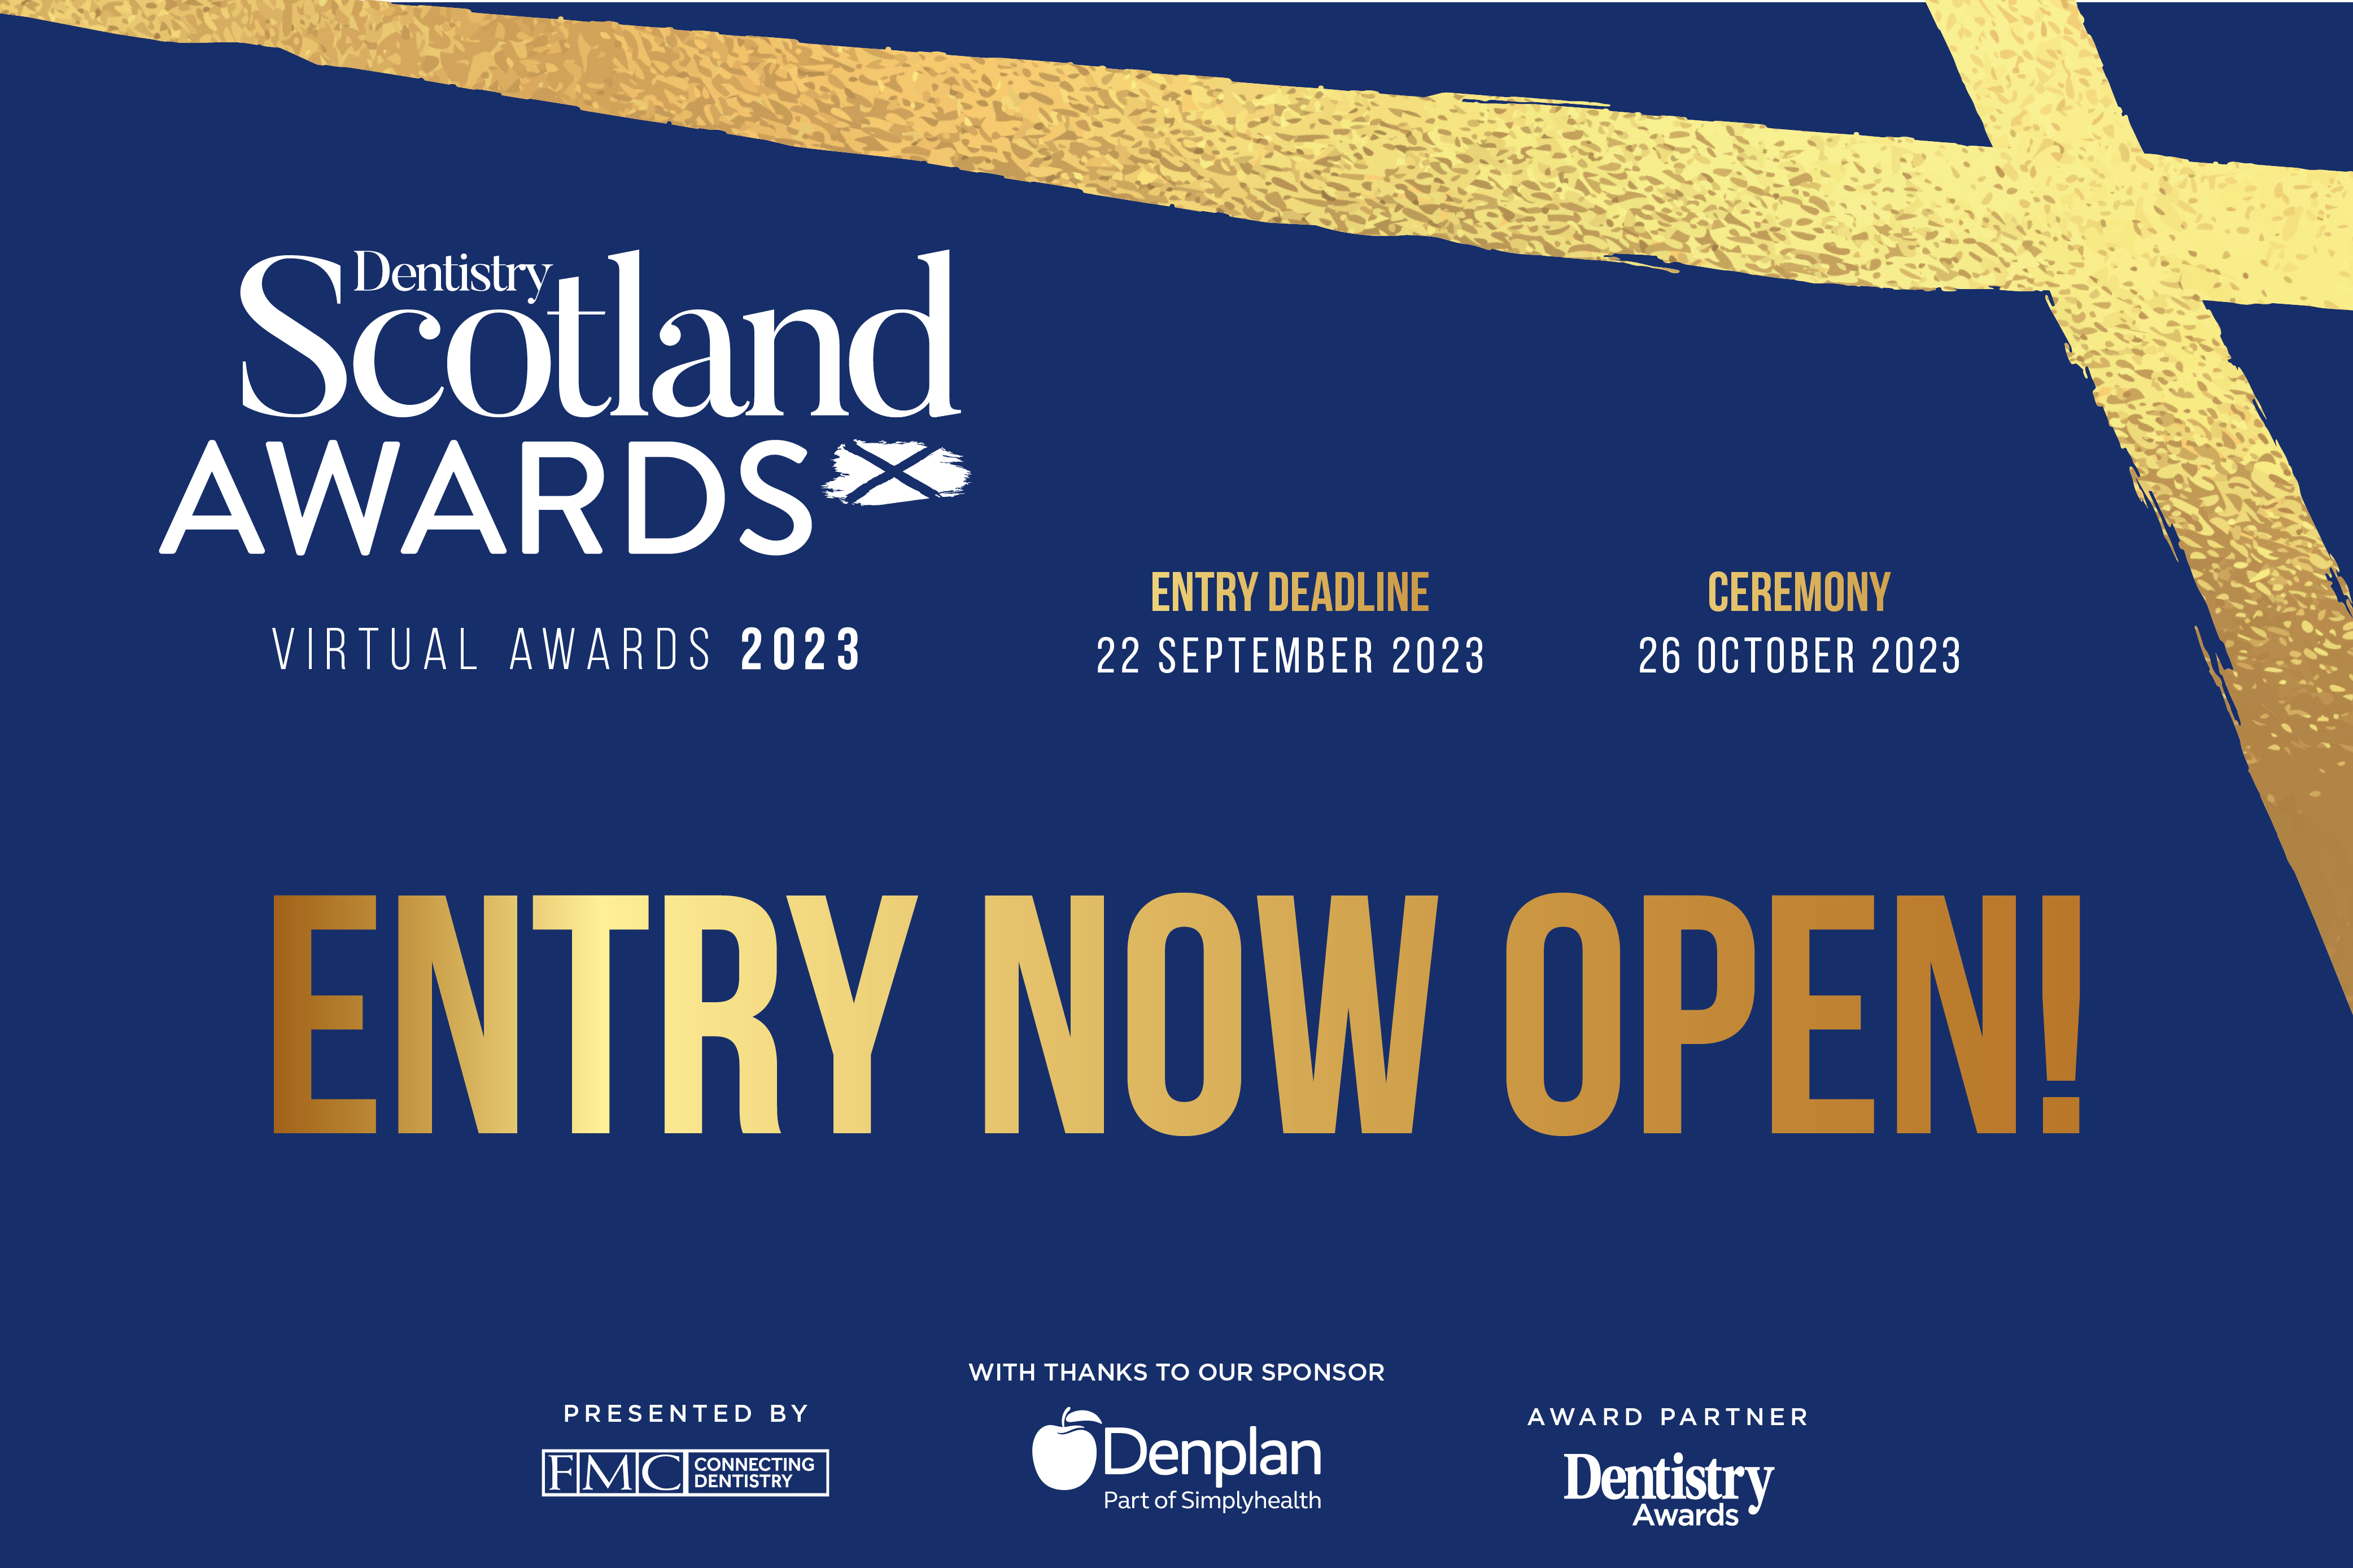 Entry is open for the Dentistry Scotland Awards